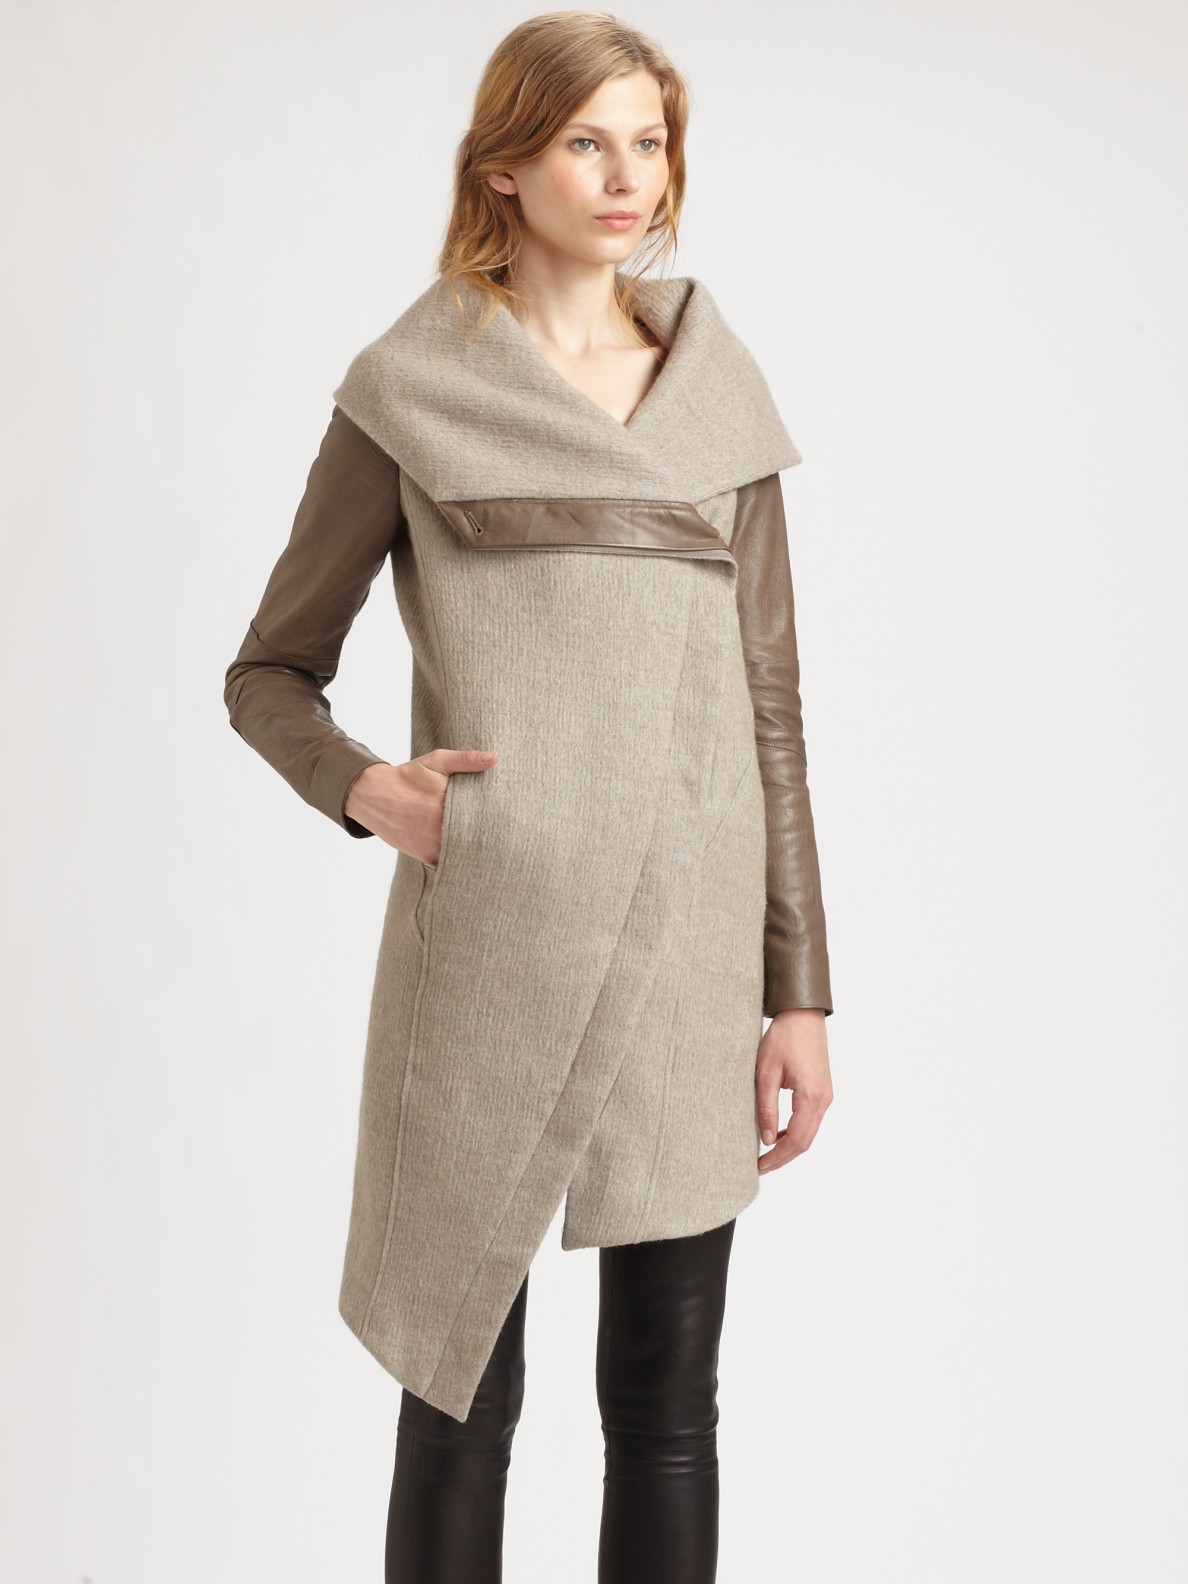 Lyst - Helmut Lang Willowed Felt Leather Sleeve Coat in Gray